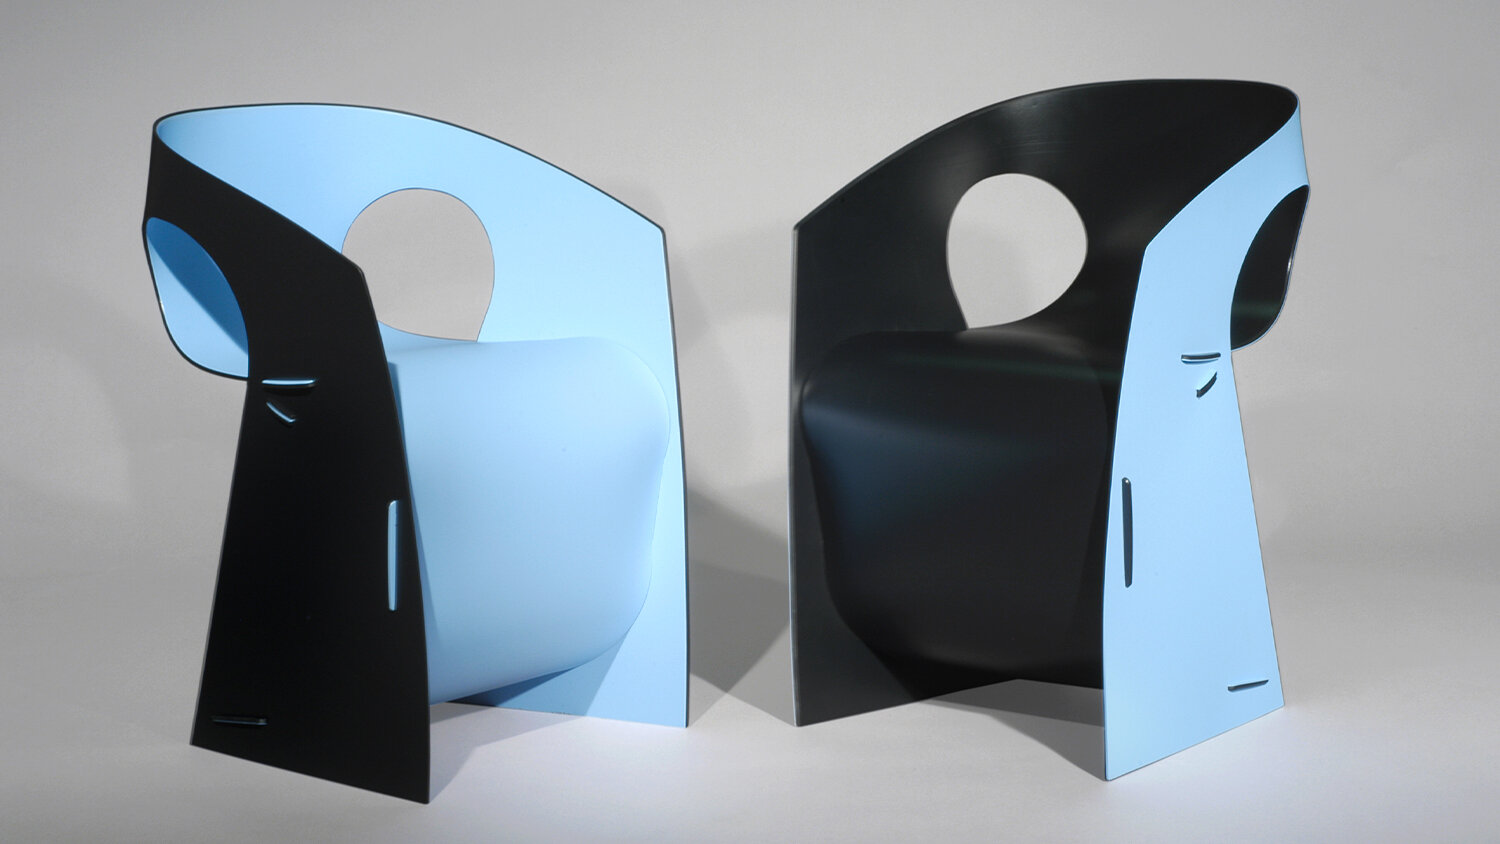 Blue-Marmalade-I-b-pop-recycled-plastic-chair-blue-black-dining-chair-living-room-dining-room-single-sheet-plastic-recyclable.jpg